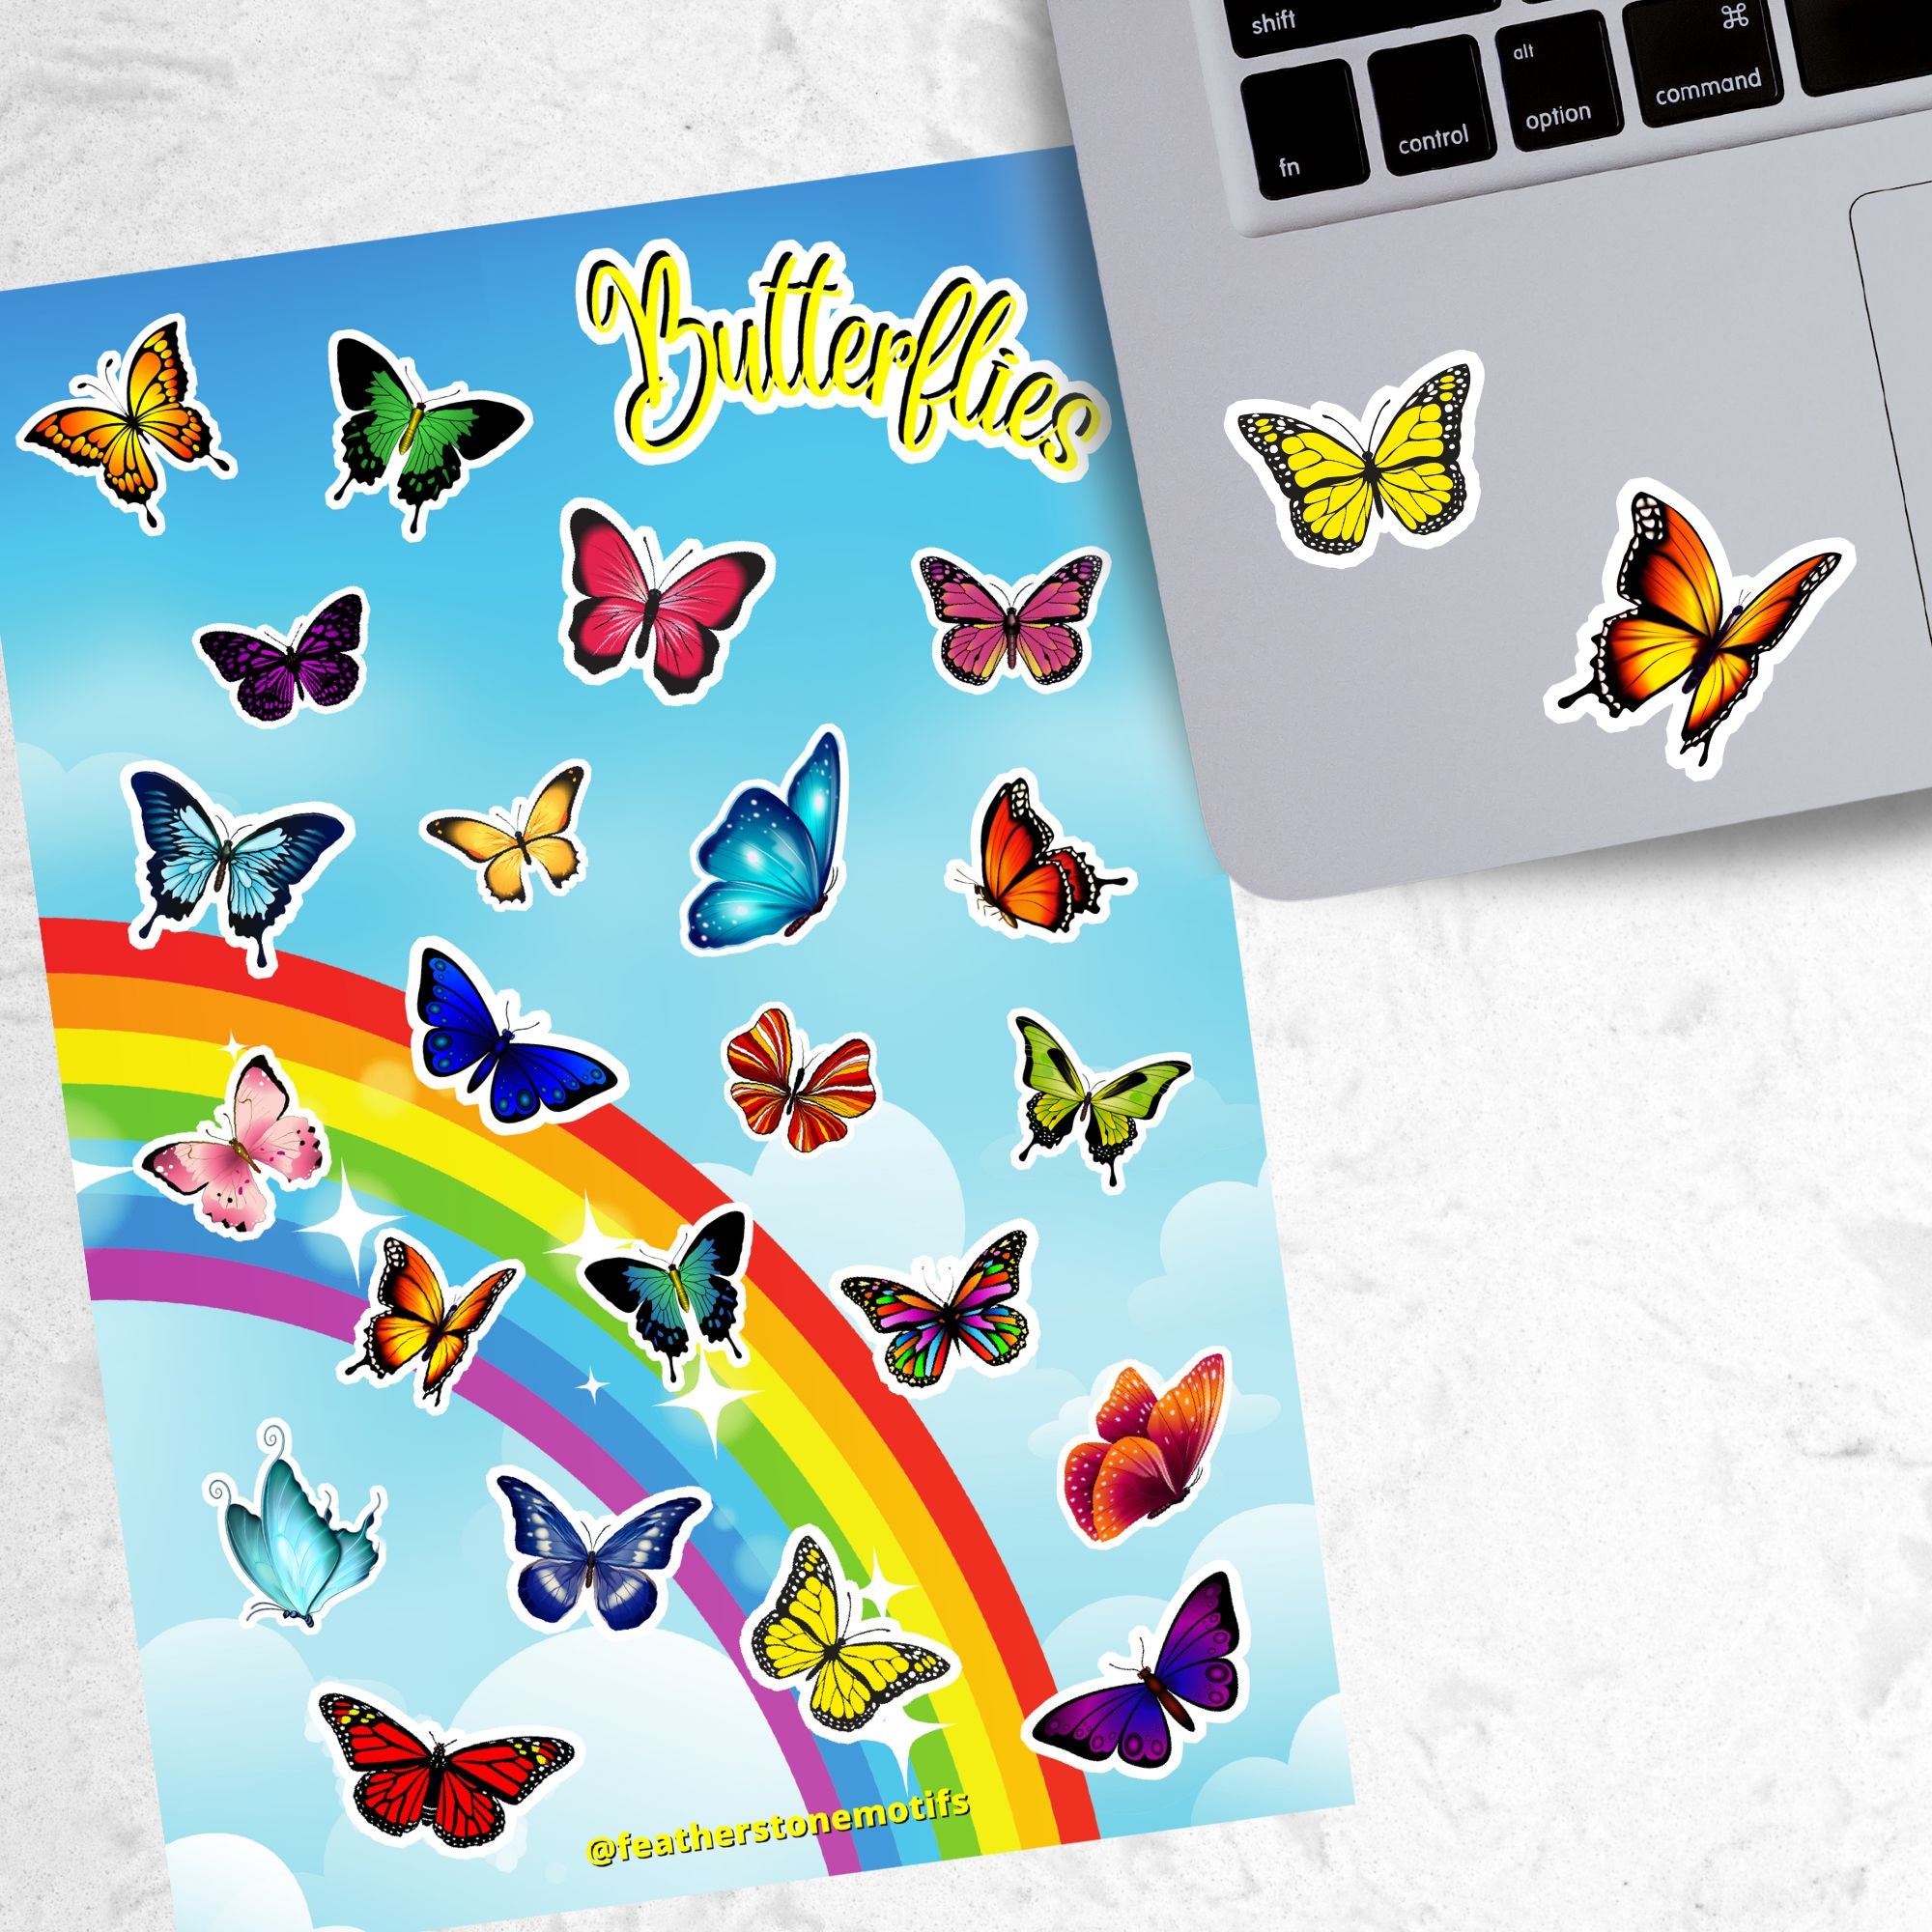 With over 20 butterfly stickers, this sticker sheet will be a sure hit with anyone who loves butterflies! This image shows the sticker sheet next to an open laptop with two Monarch butterfly stickers applied below the keyboard.